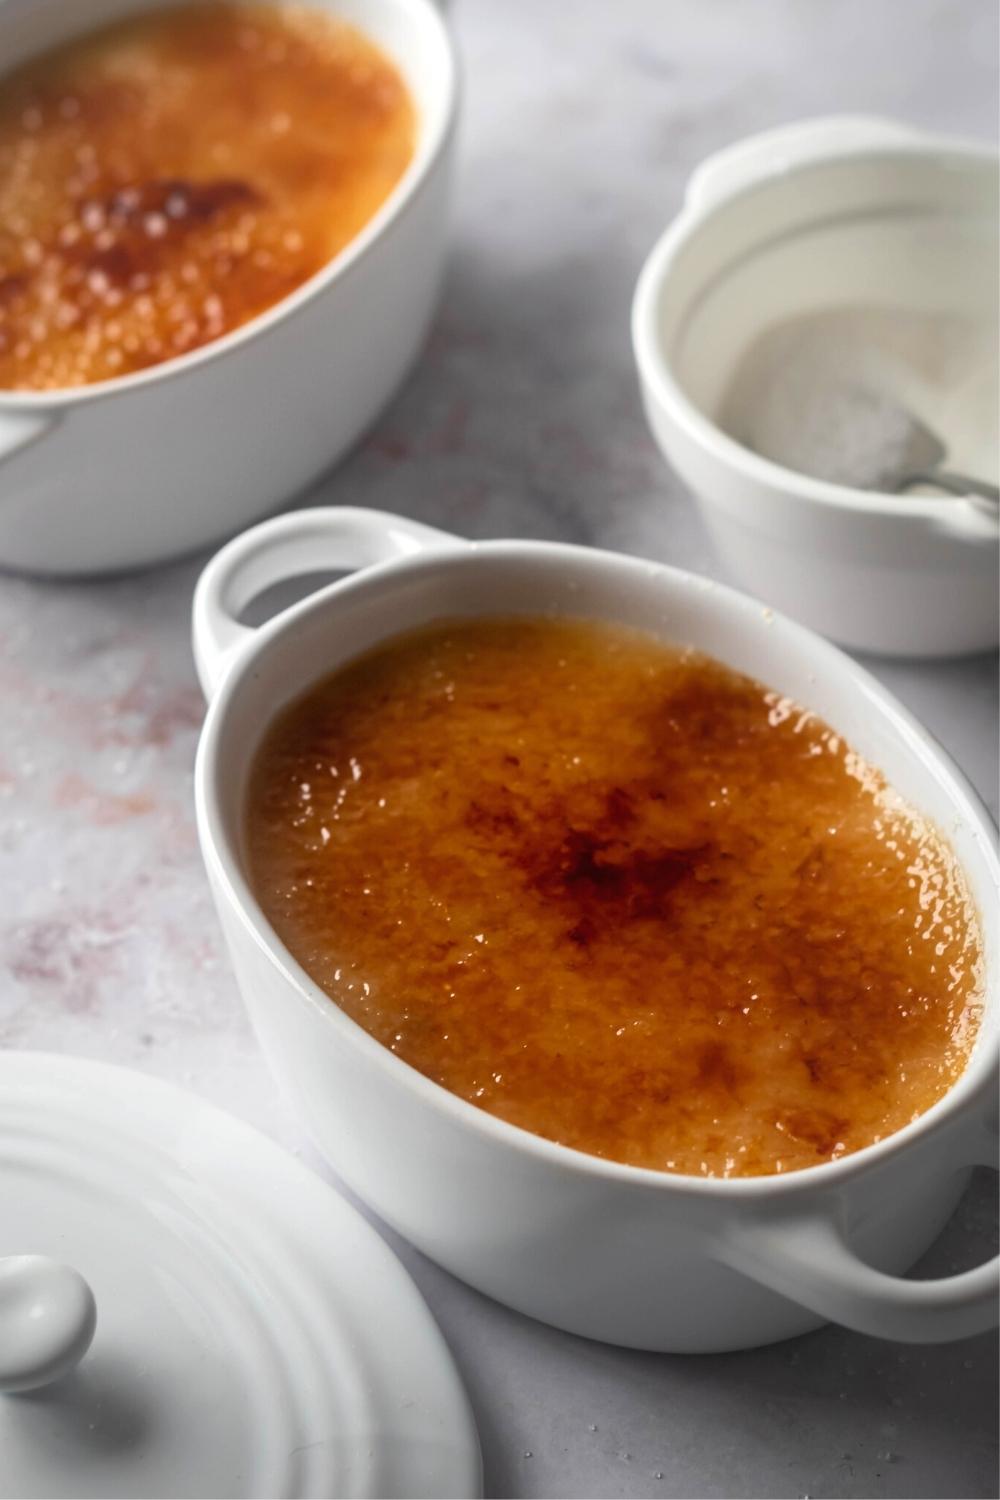 A large white ramekin with crème brûlée in it. Behind it is part of another ramekin with crème brûlée and part of a small white bowl filled with sugar.